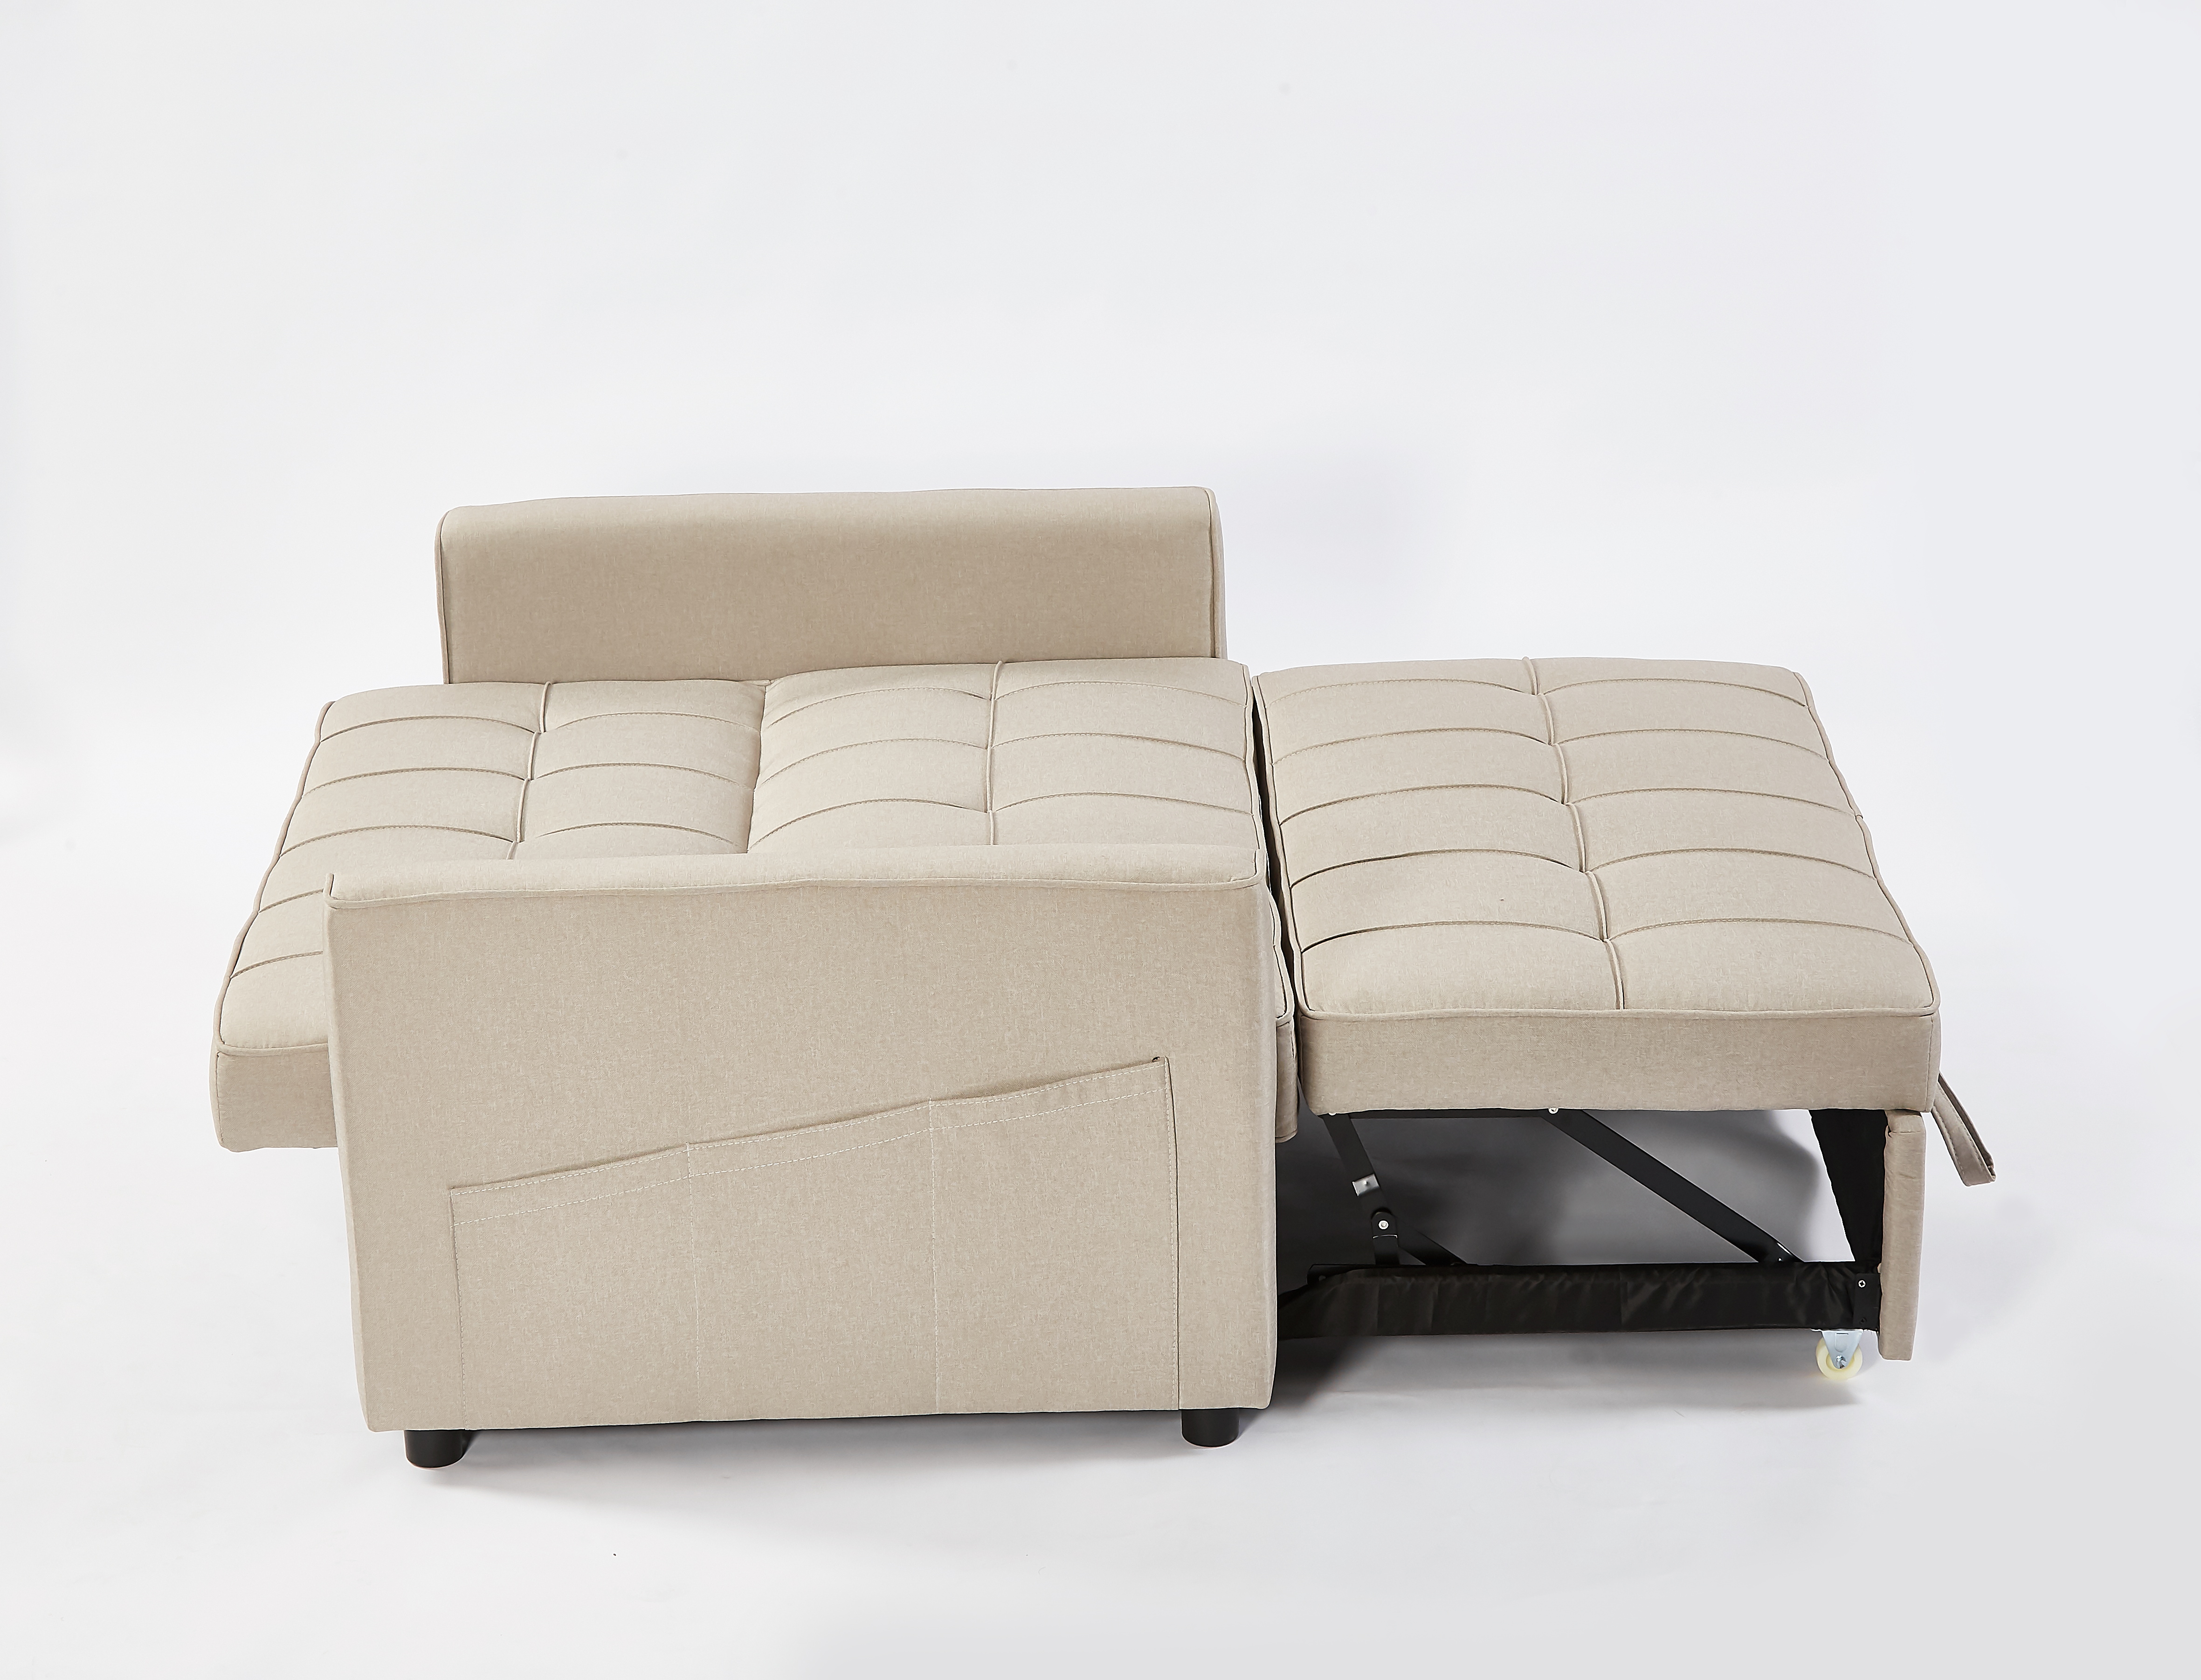 SOFA BED with ARMREST